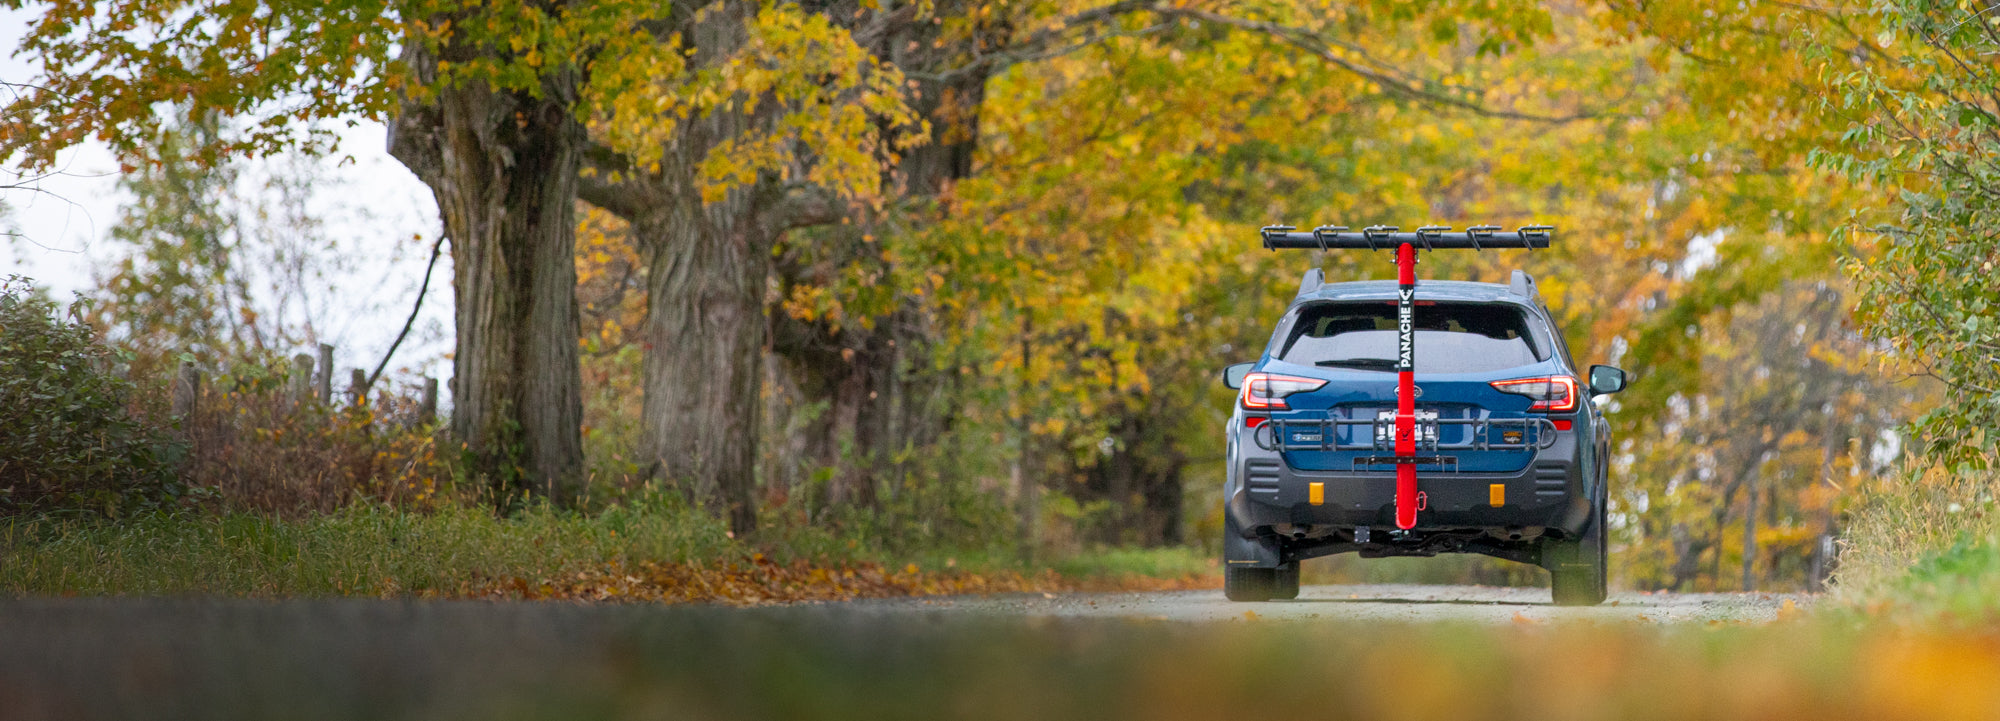 Horizontal picture of a Subaru equipped with a T6 Panache Rack bike rack coming down a nice dirt road in fall